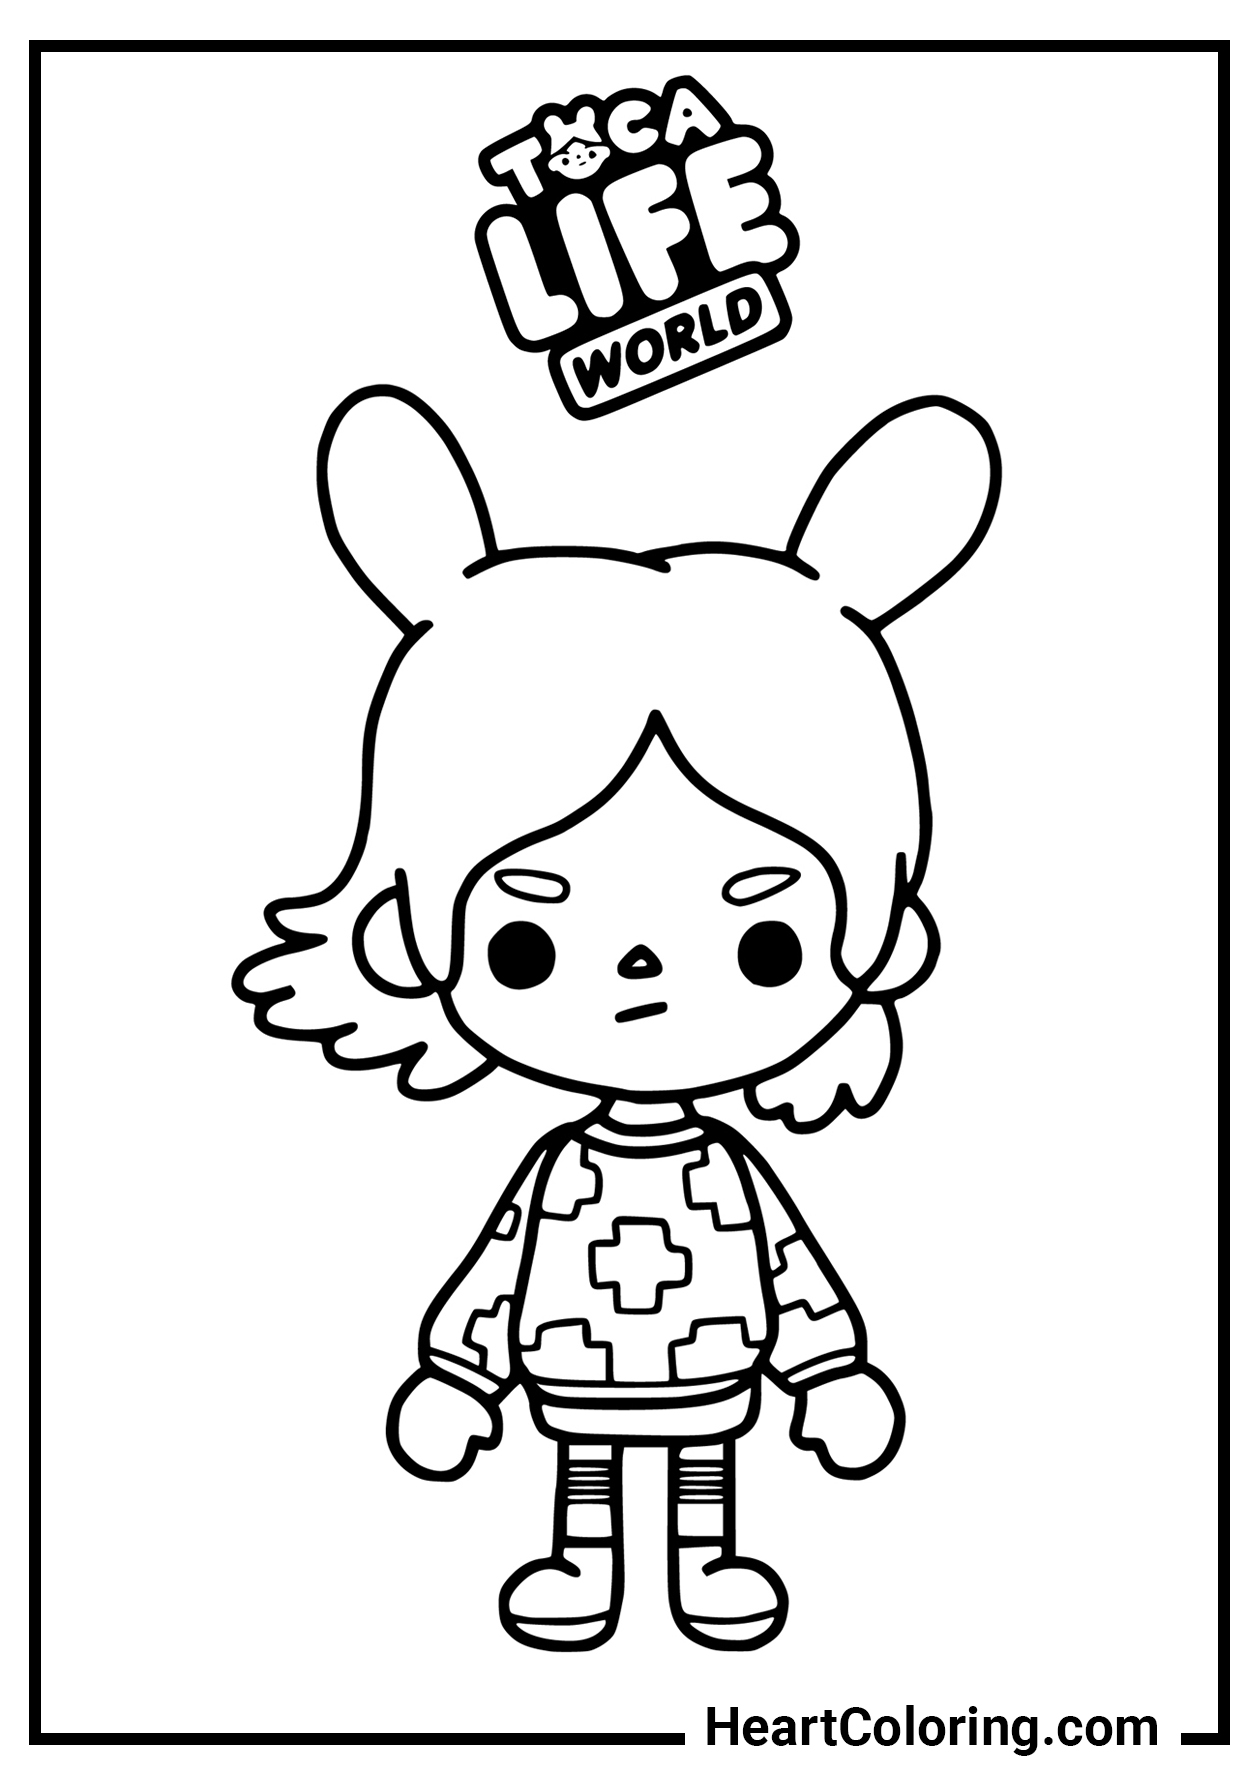 Toca Boca Coloring Pages - 30+ Free A4 ...